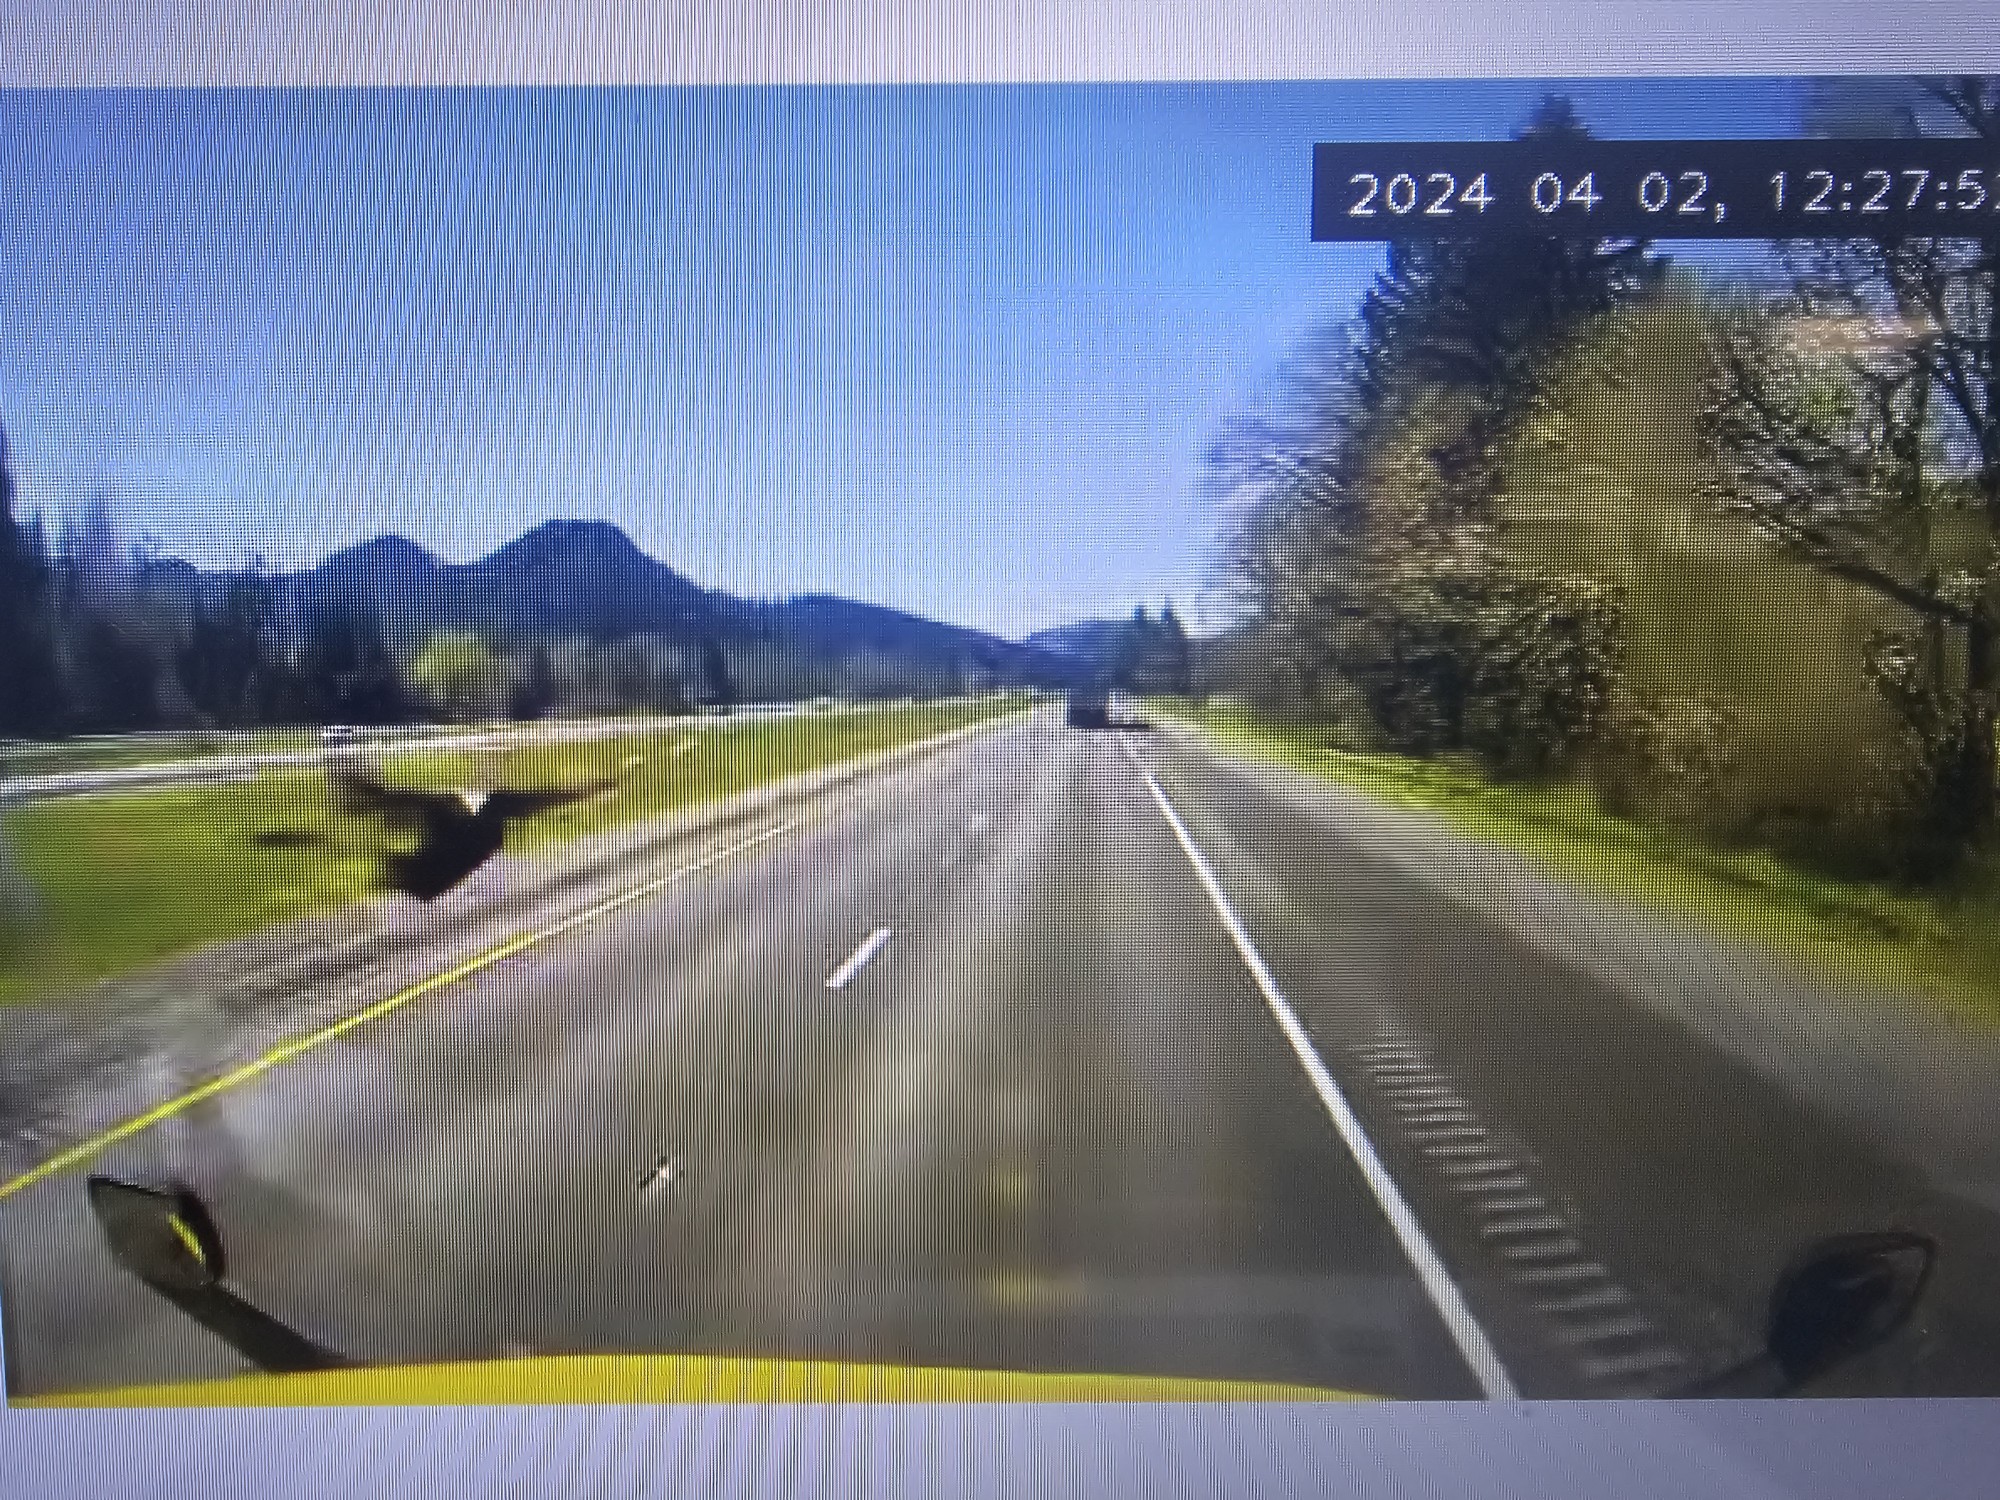 Truck driver David Duell is in the hospital after a turkey went through his windshield causing the truck to crash near Grants Pass on Apr. 9, 2024.